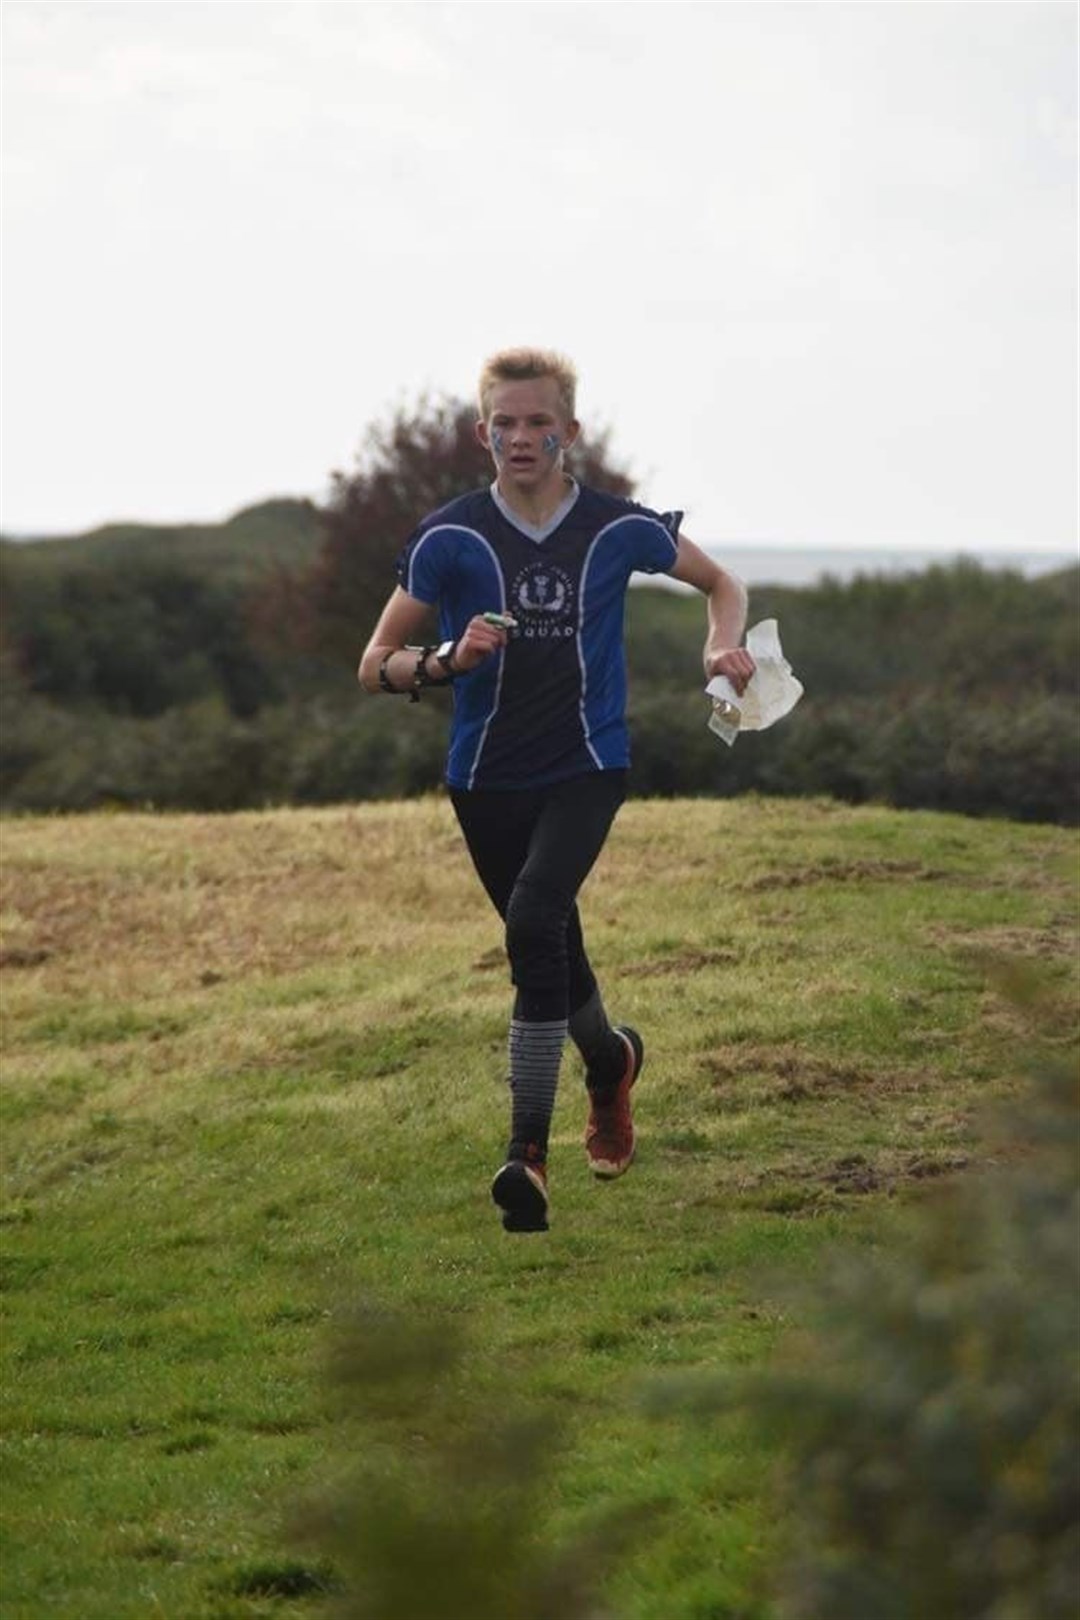 Finlay McLuckie finishing the JIRC individual race. Photo by Michael Bishenden